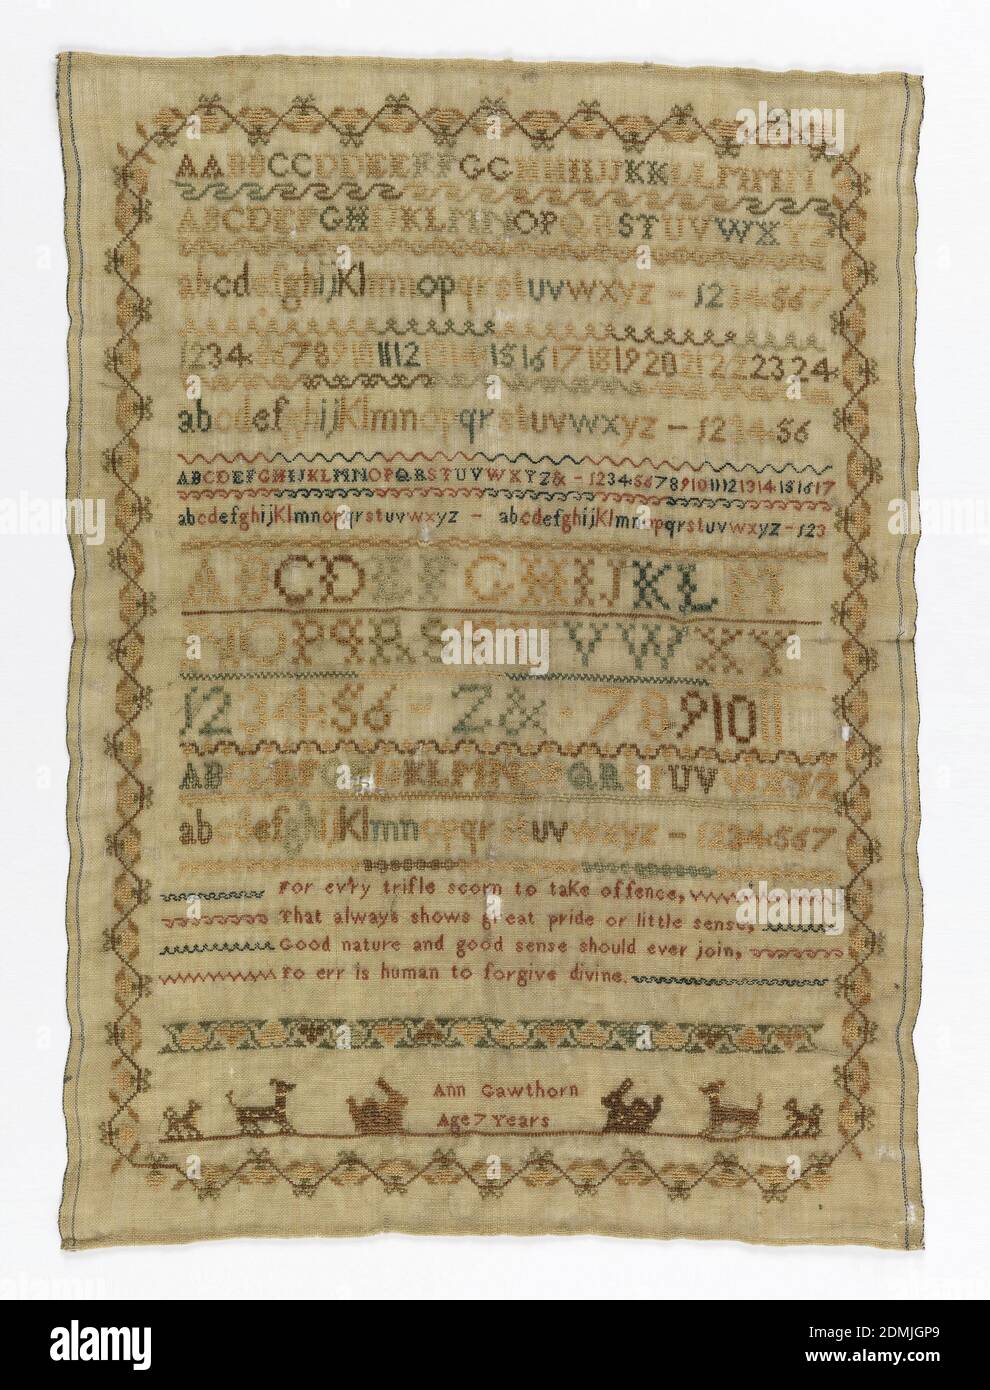 Sampler, Ann Gawthorn, English, Medium: silk embroidery on wool foundation Technique: embroidered in cross, marking cross and eyelet stitches on plain weave foundation, Within a curving floral border, alphabets and text:, For every trifle scorn to take offence, That always shows great pride or little sense, Good nature and good sense should ever join, To err is human to forgive devine, England, late 18th century, embroidery & stitching, Sampler Stock Photo